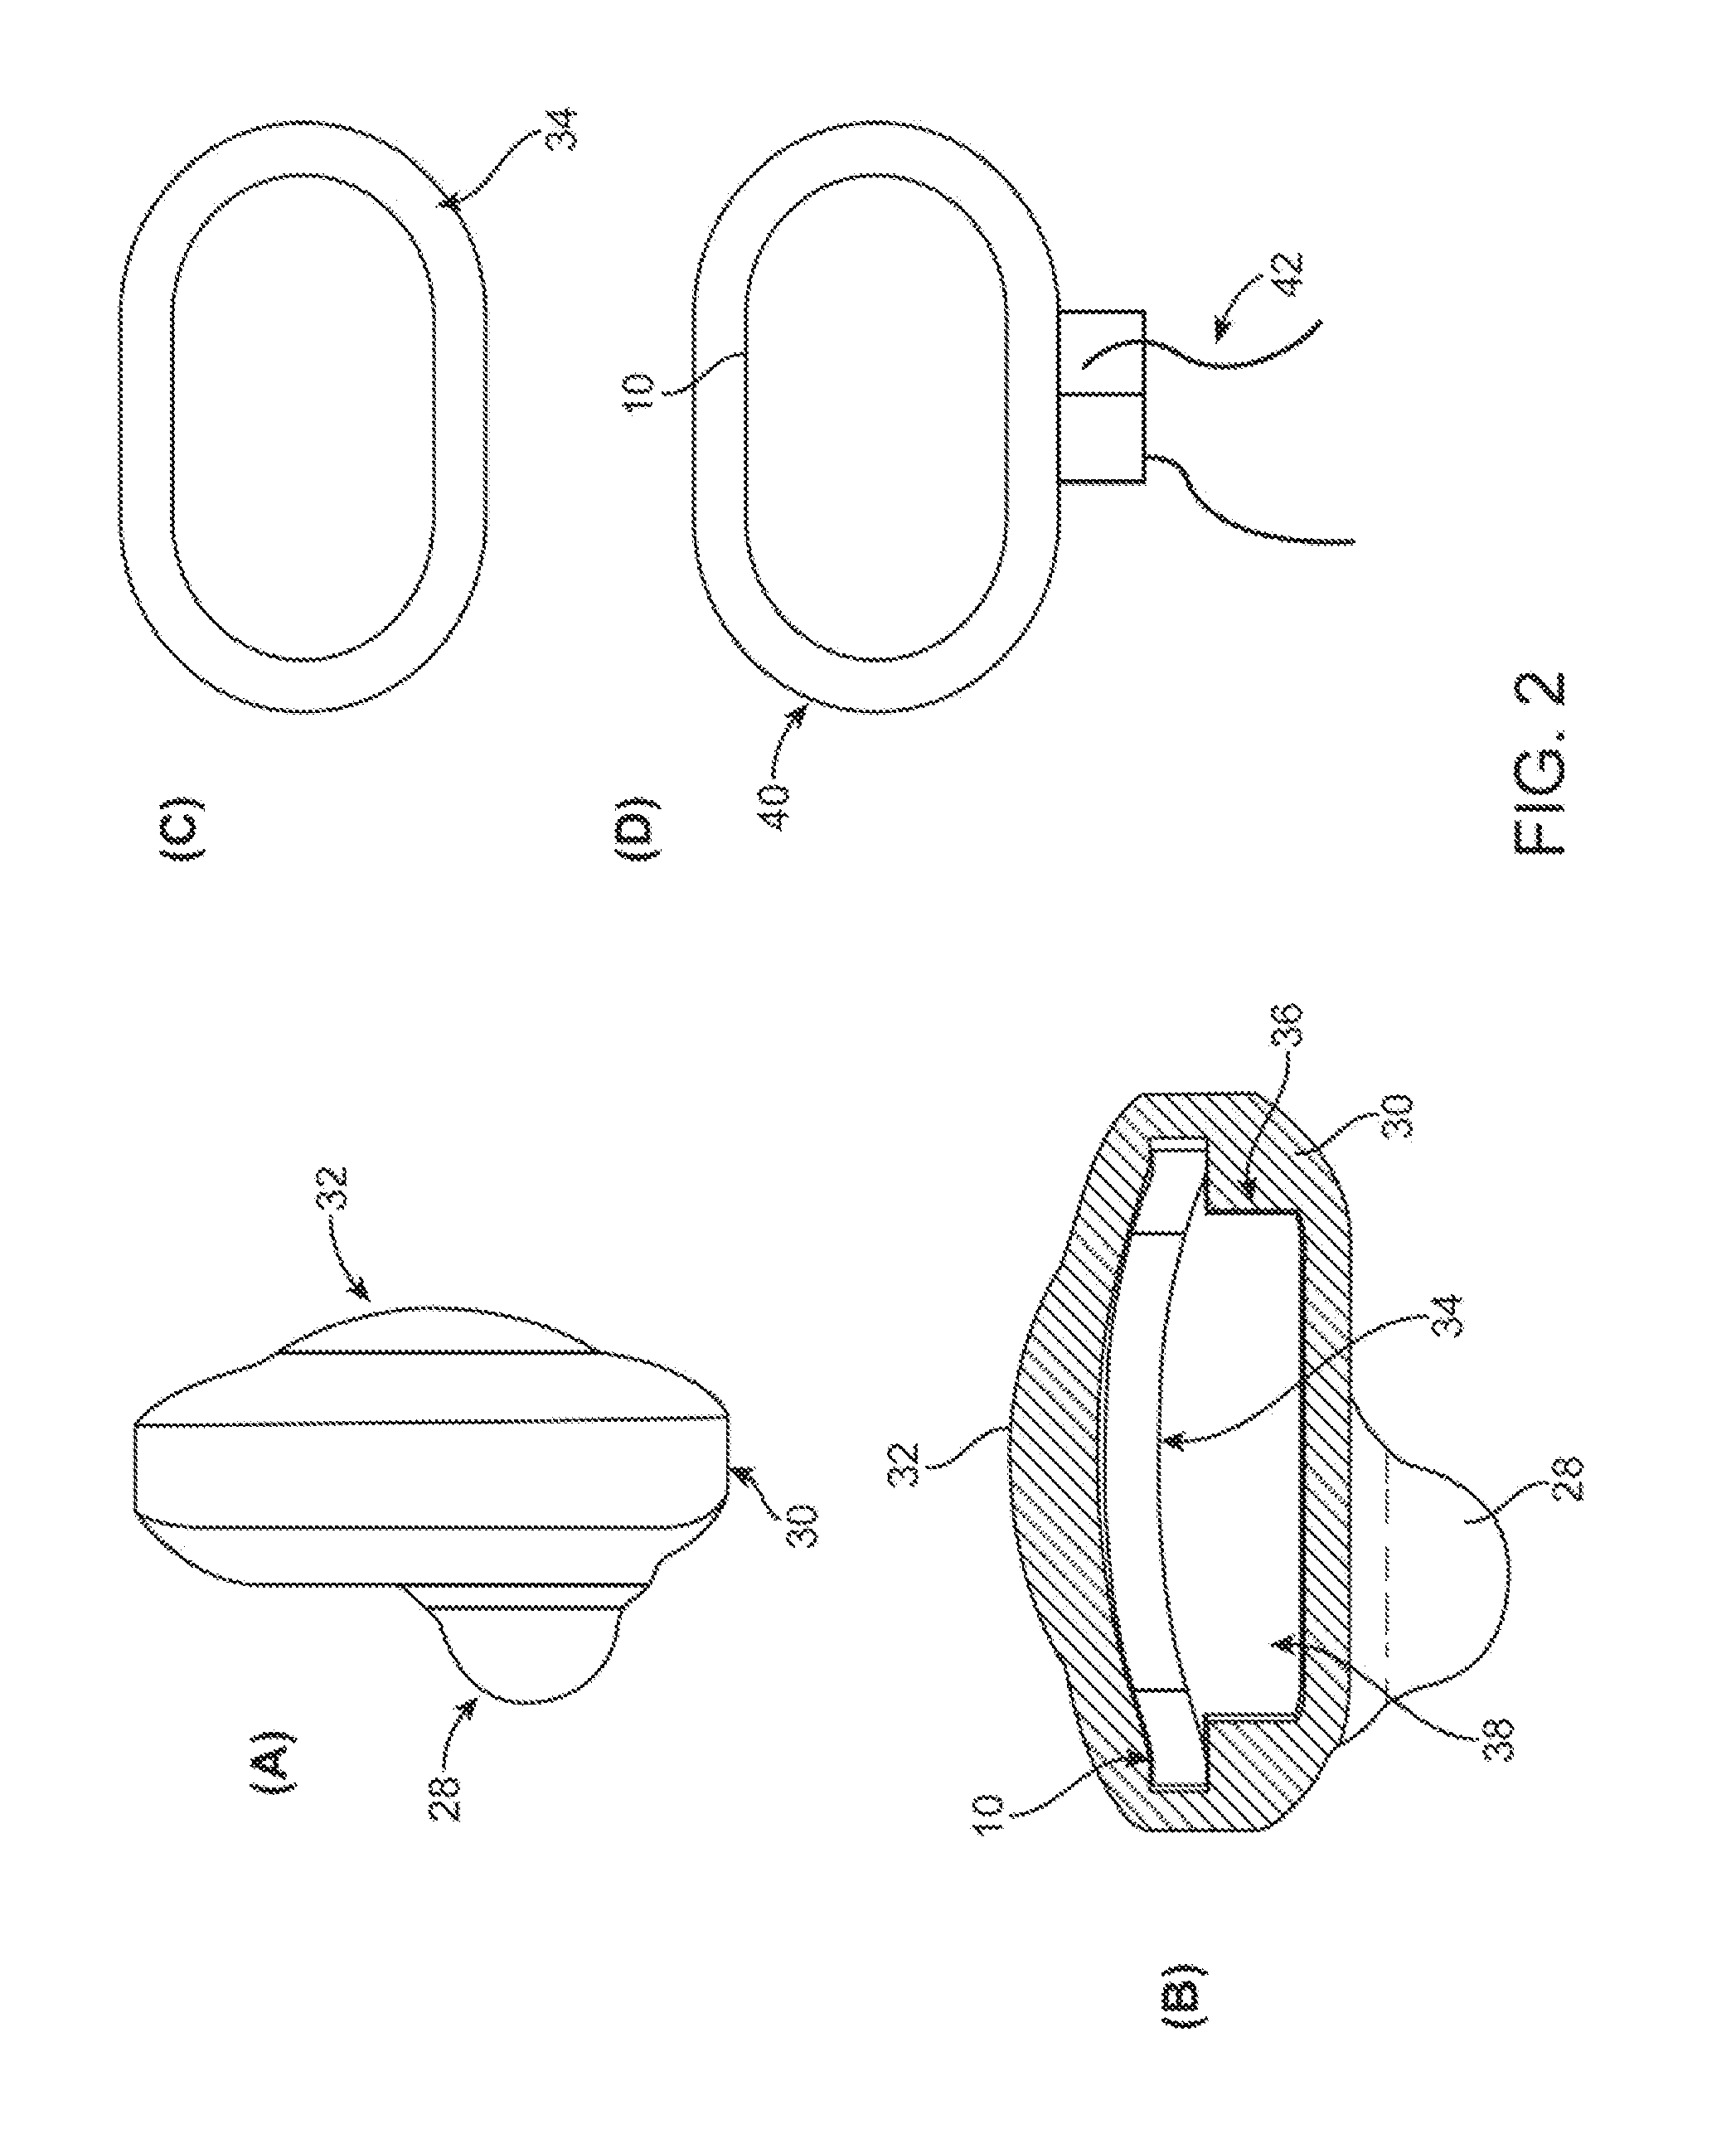 Intra-oral tissue conduction microphone